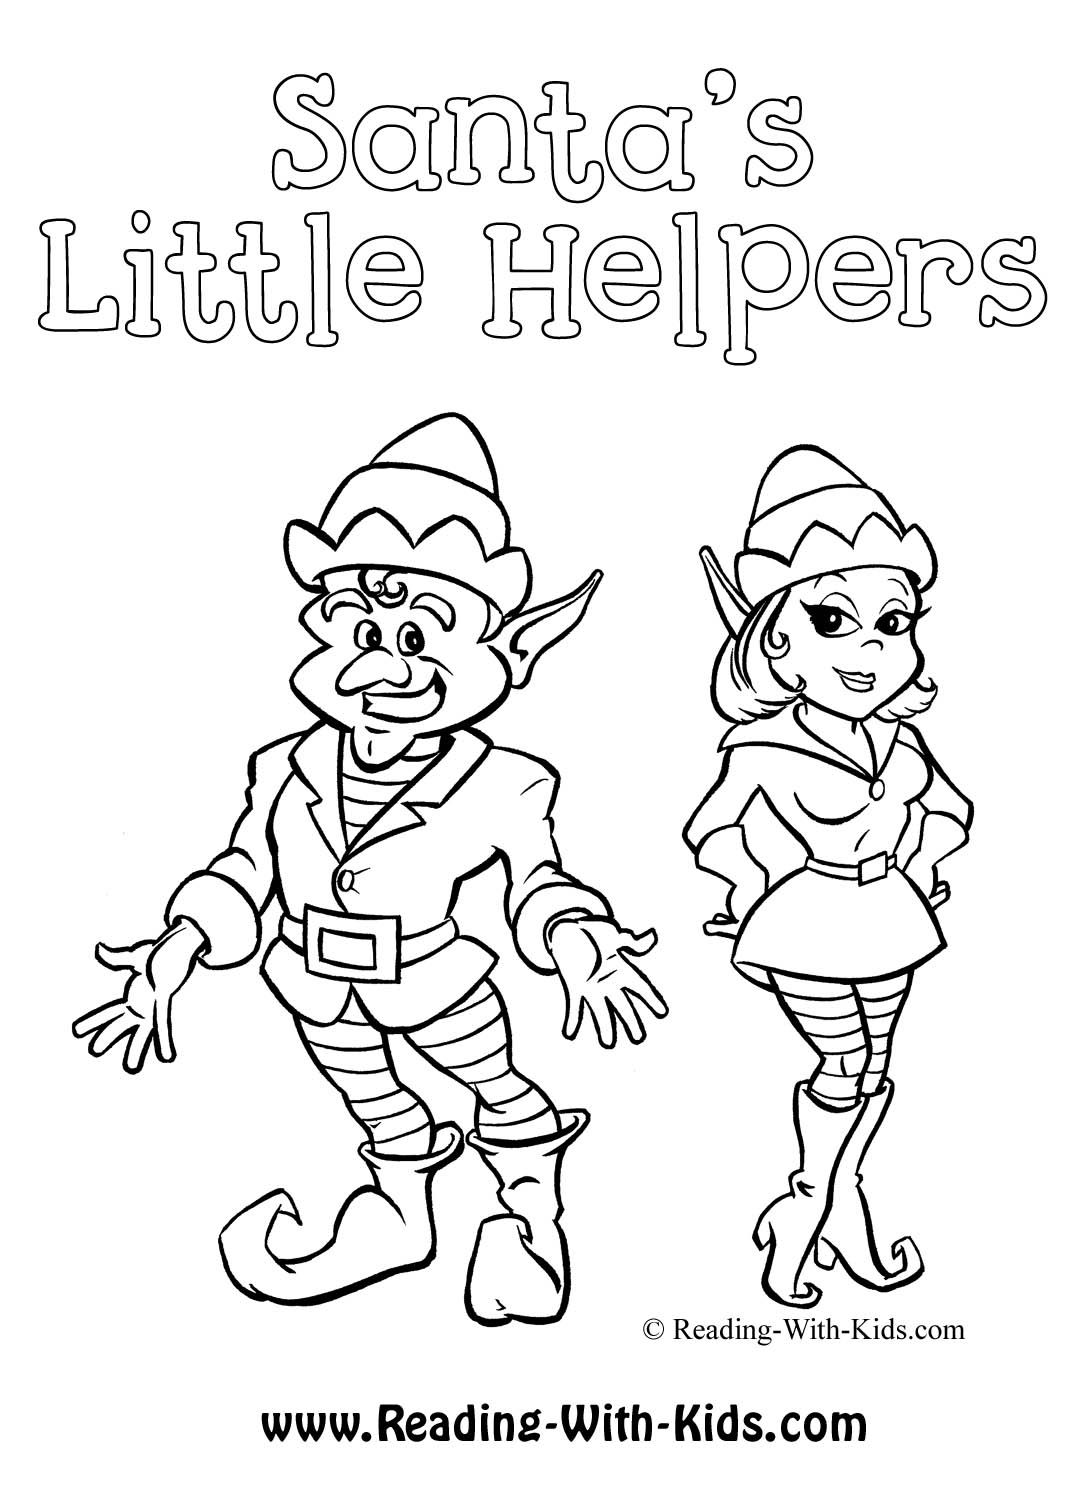 elf on the shelf colouring pages printable - Clip Art Library